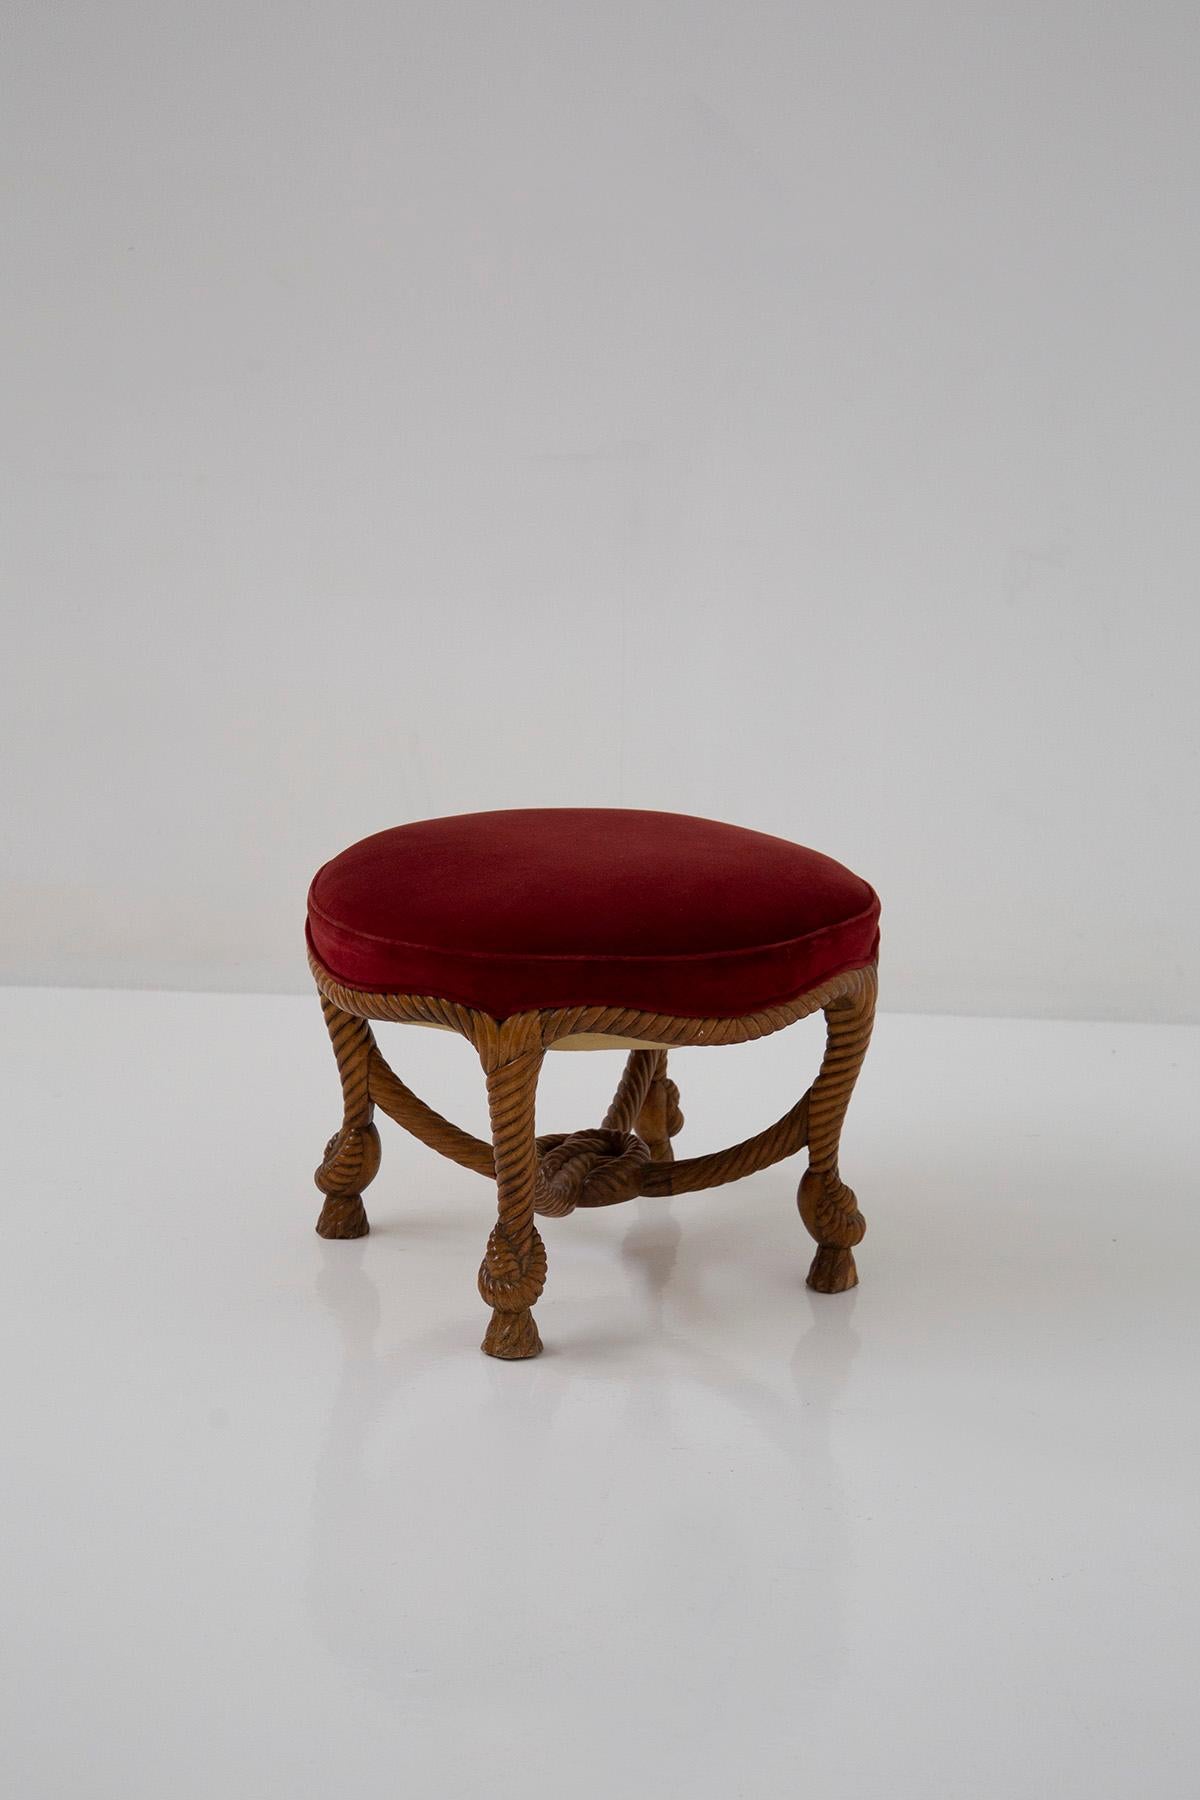 This important French stool or Ottoman, in the manner and style of Napoleon III and Fournier A.M.E, is an excellent testimony to the period. Made of carved wood, it displays an extraordinary mastery of carving. Its rope-like structure is a